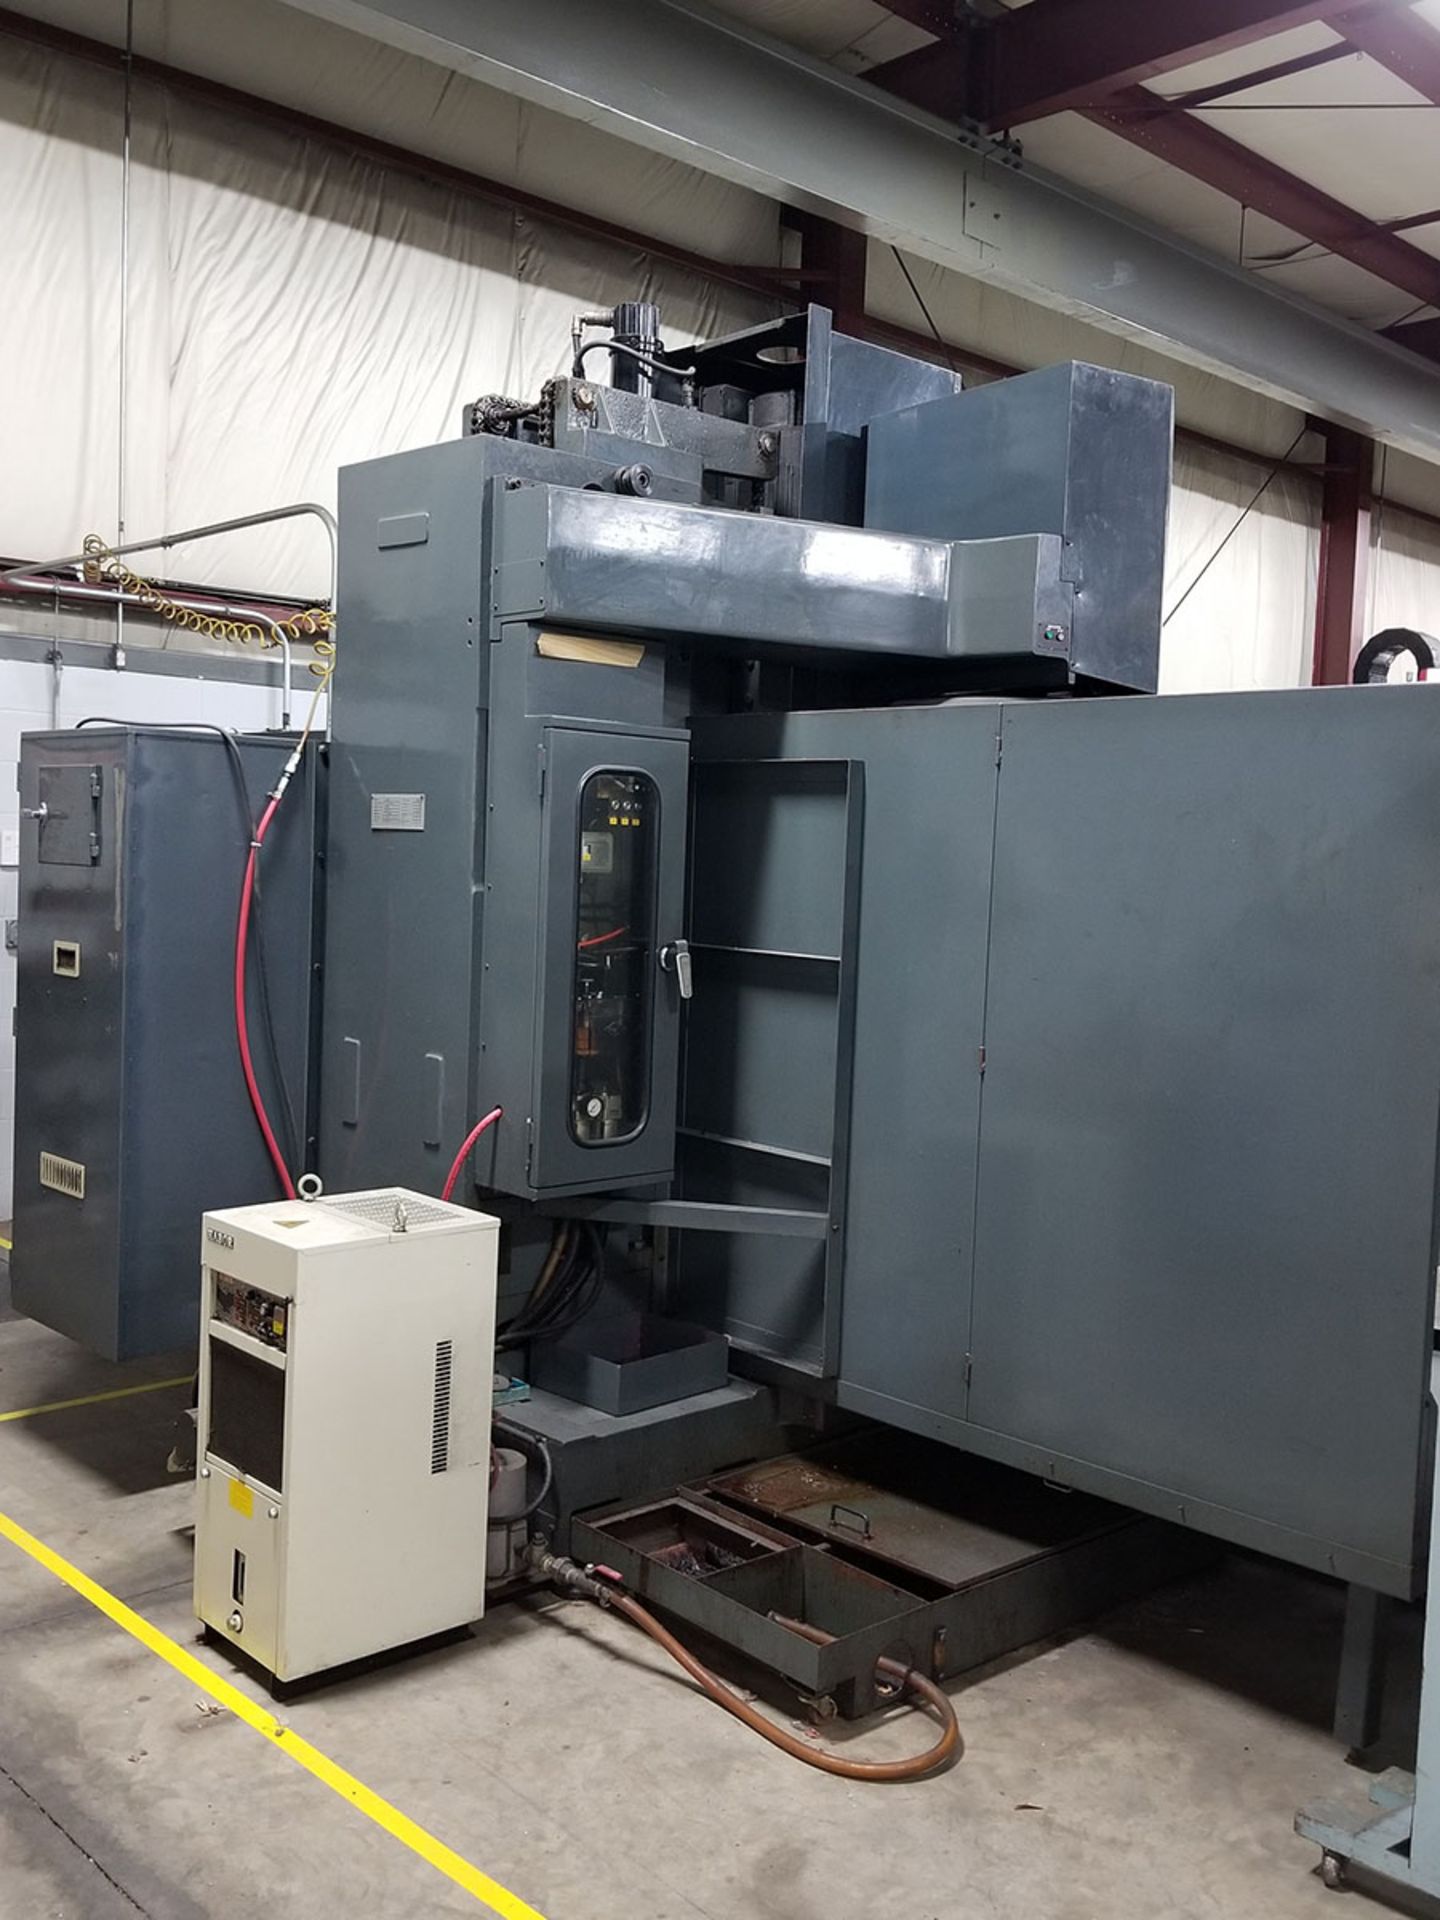 1991 SHARNOA VERTICAL MACHINING CENTER, MODEL SVC-52D, TIGER 5 DRO PROGRAMMABLE CONTROL, 20 POSITION - Image 4 of 15